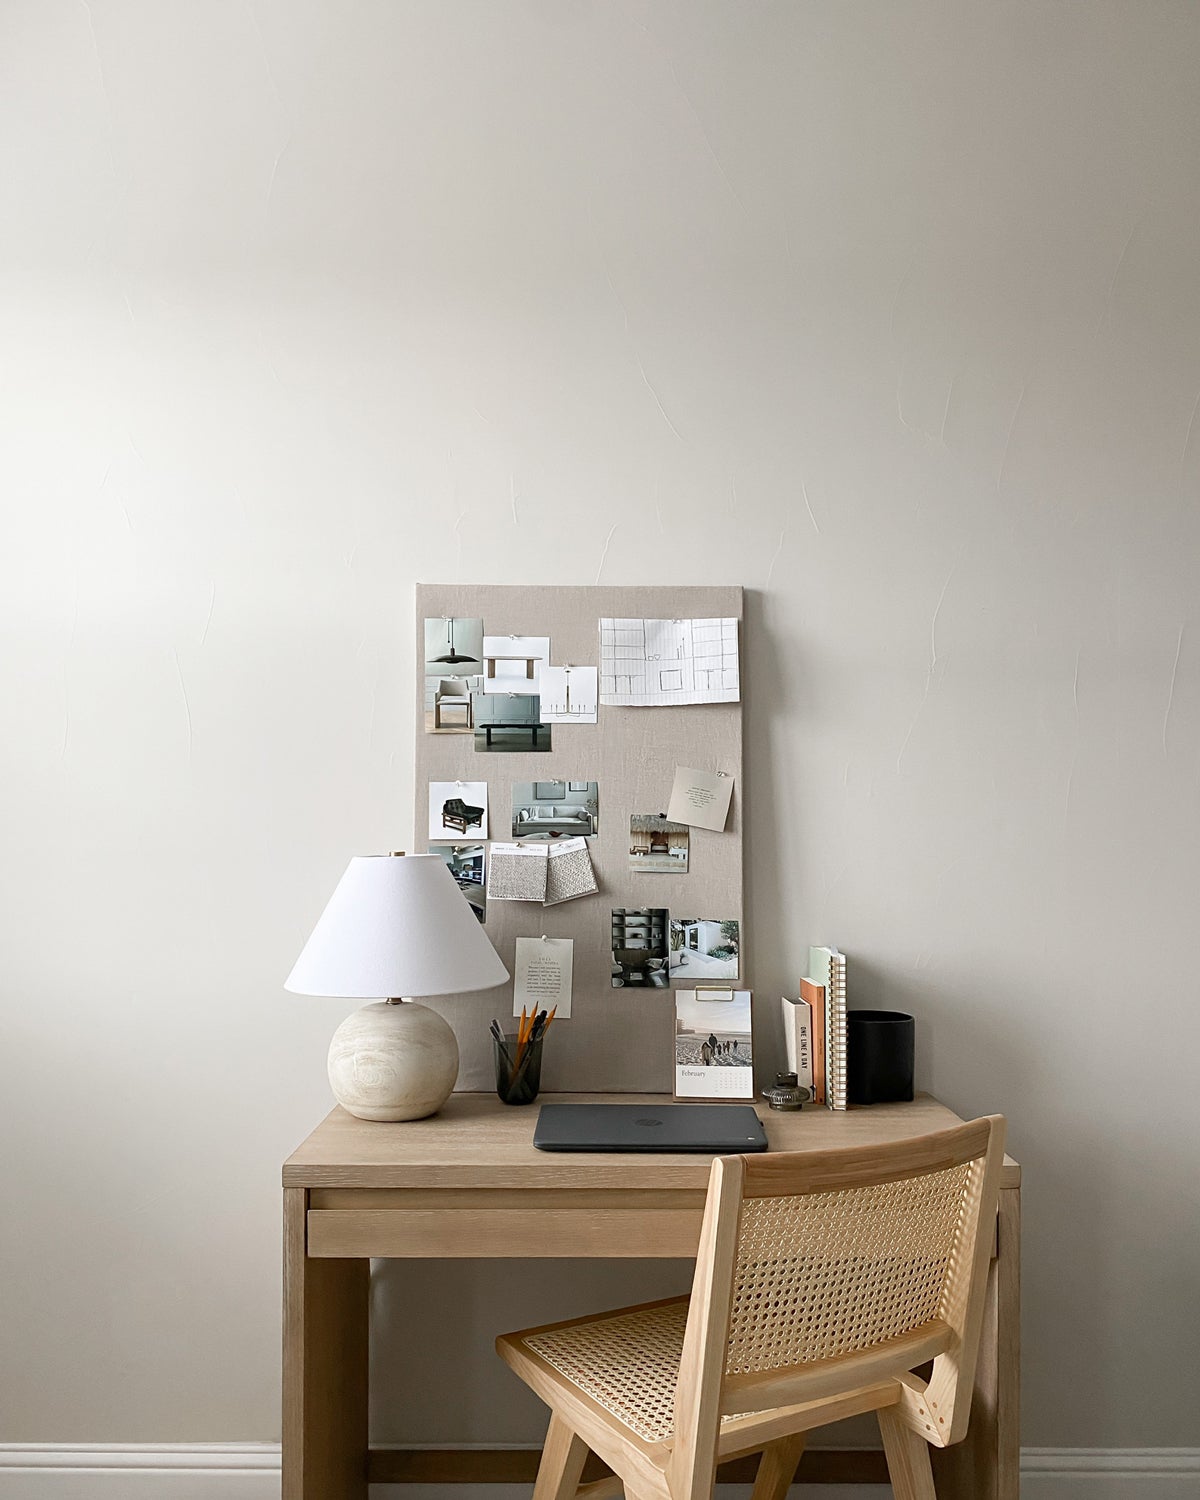 Bulletin board adorned with pictures standing on small desk with wooden chair